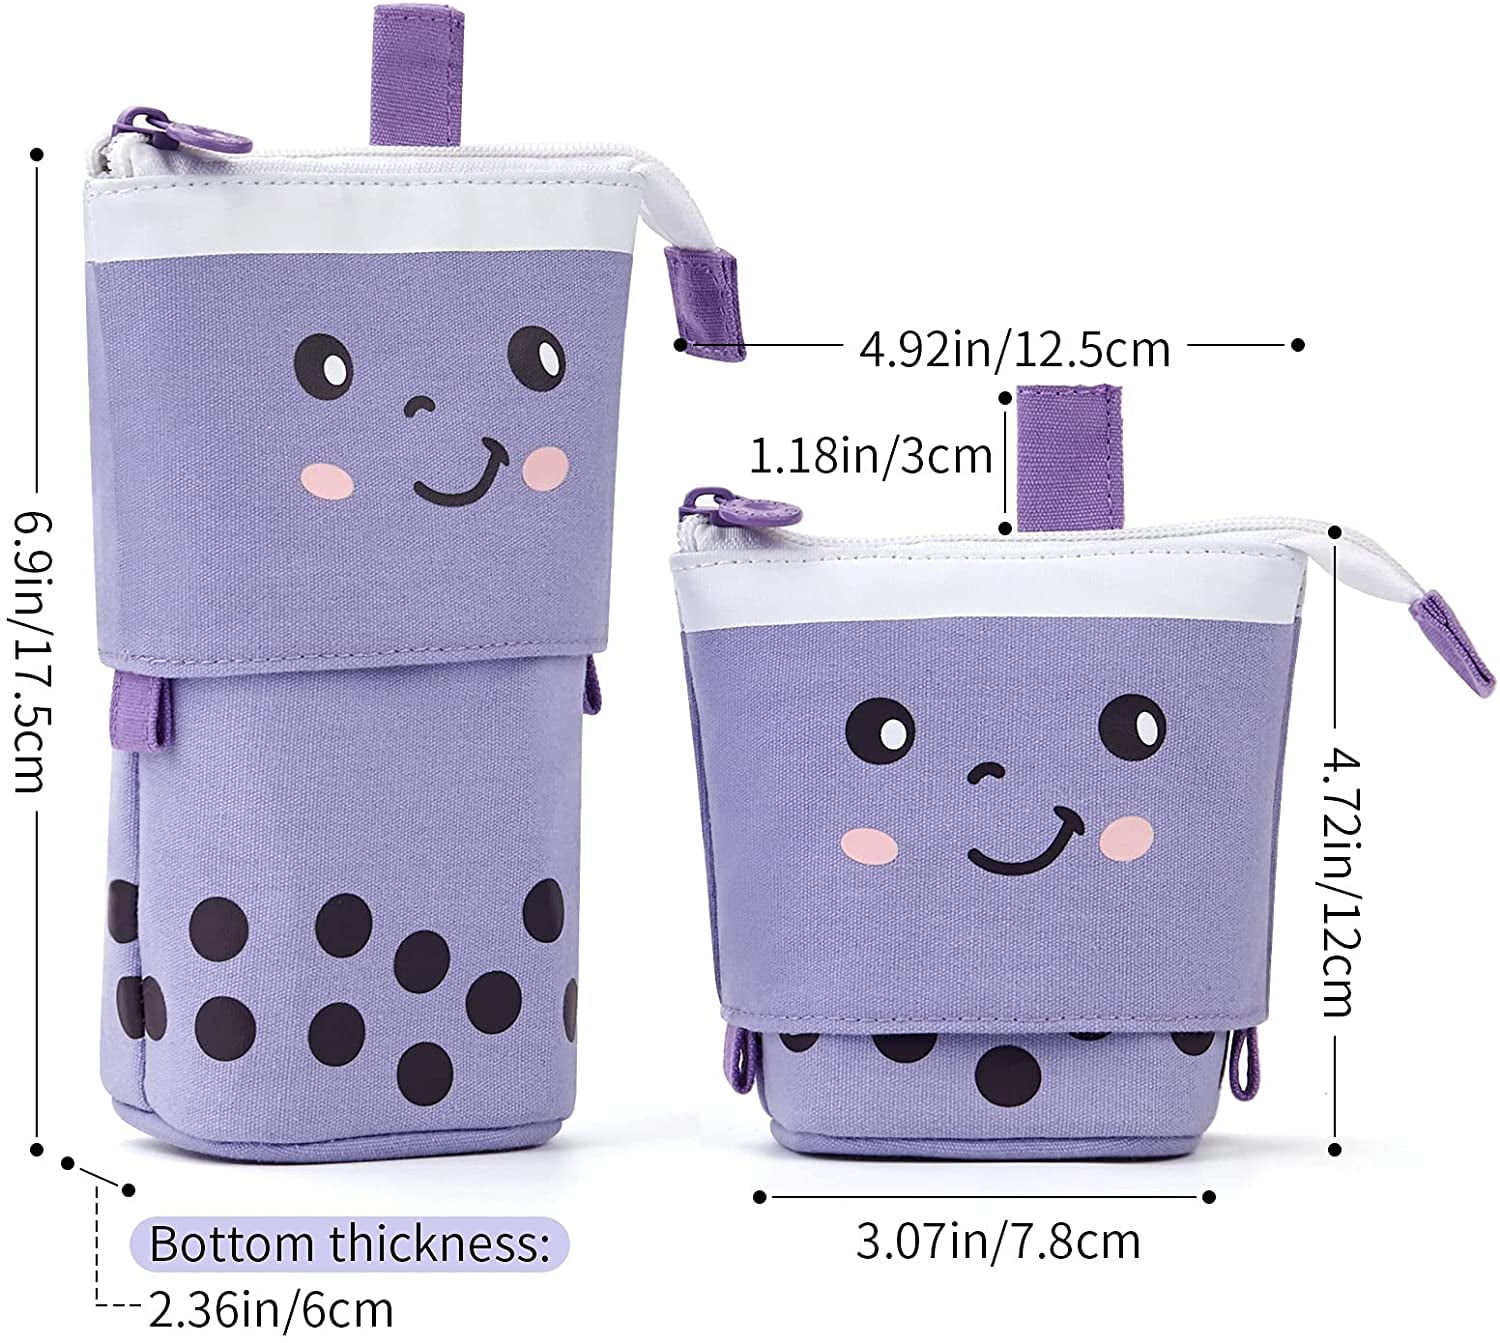 Cute Boba Milk Tea Telescopic Pencil Holder Stand Up Case For Students  Stationery Pouch The Lunch Box From Toysmall666, $4.75